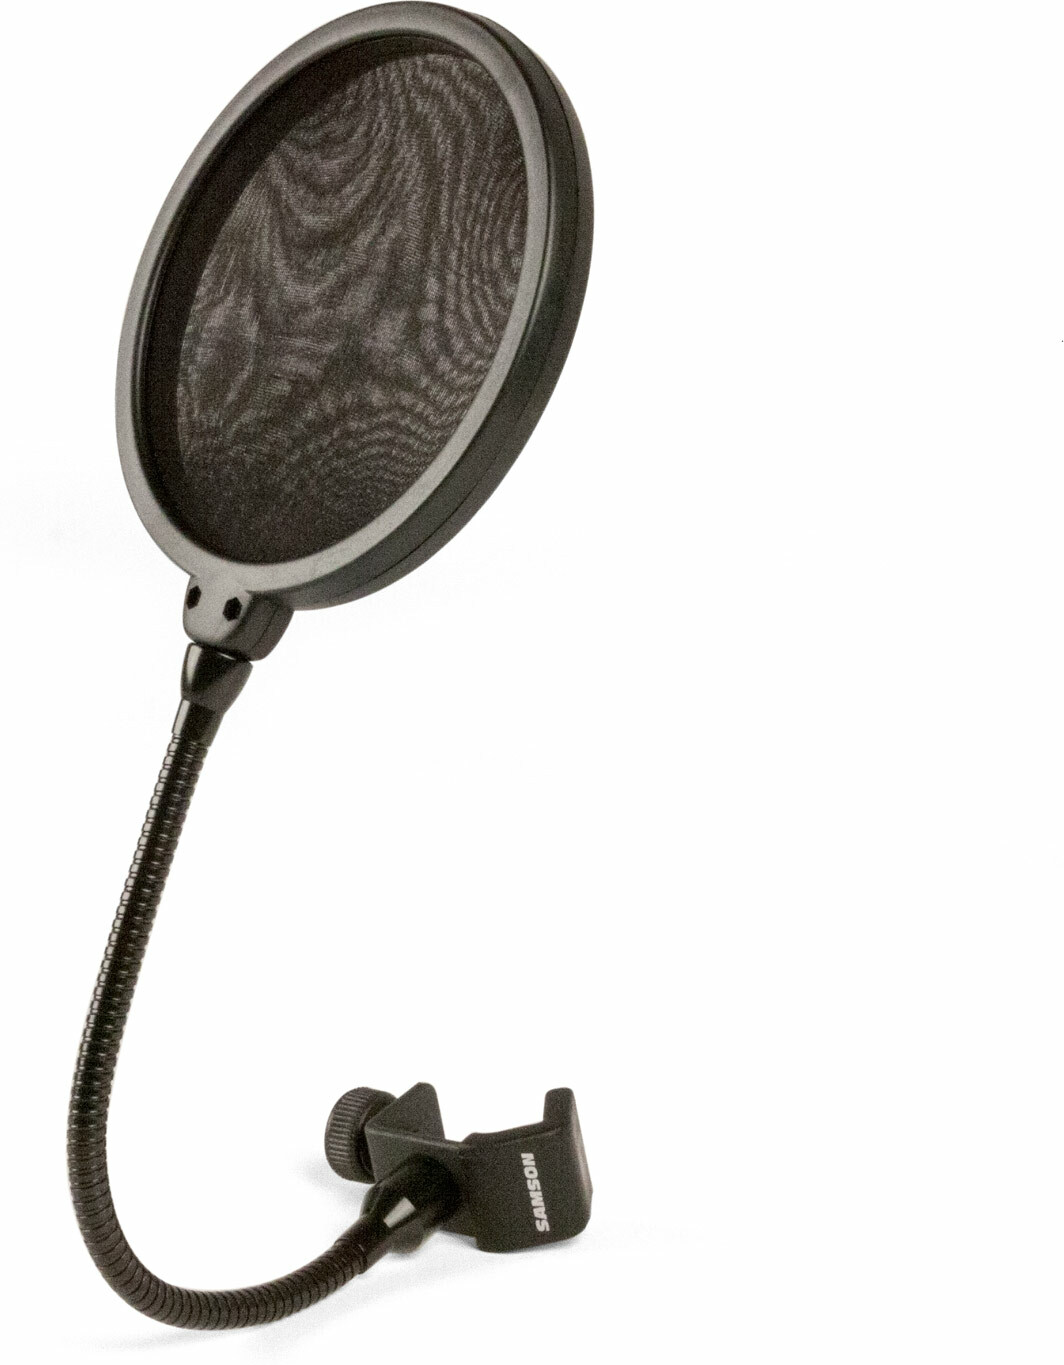 Samson Ps04 - Pop filter & microphone screen - Main picture